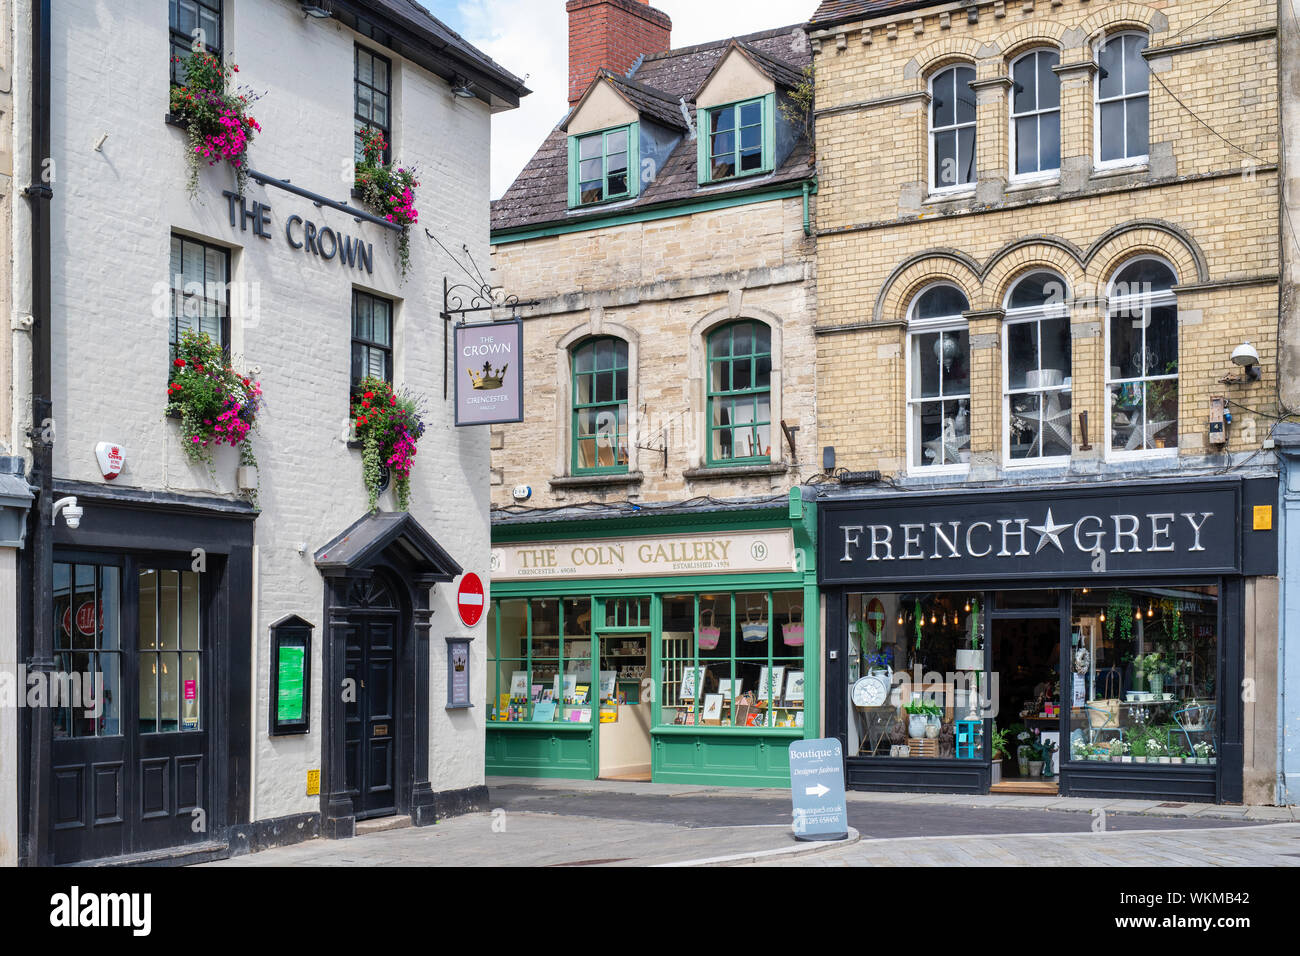 The Crown Inn and black jack street shops. Cirencester, Cotswolds, Gloucestershire, England Stock Photo